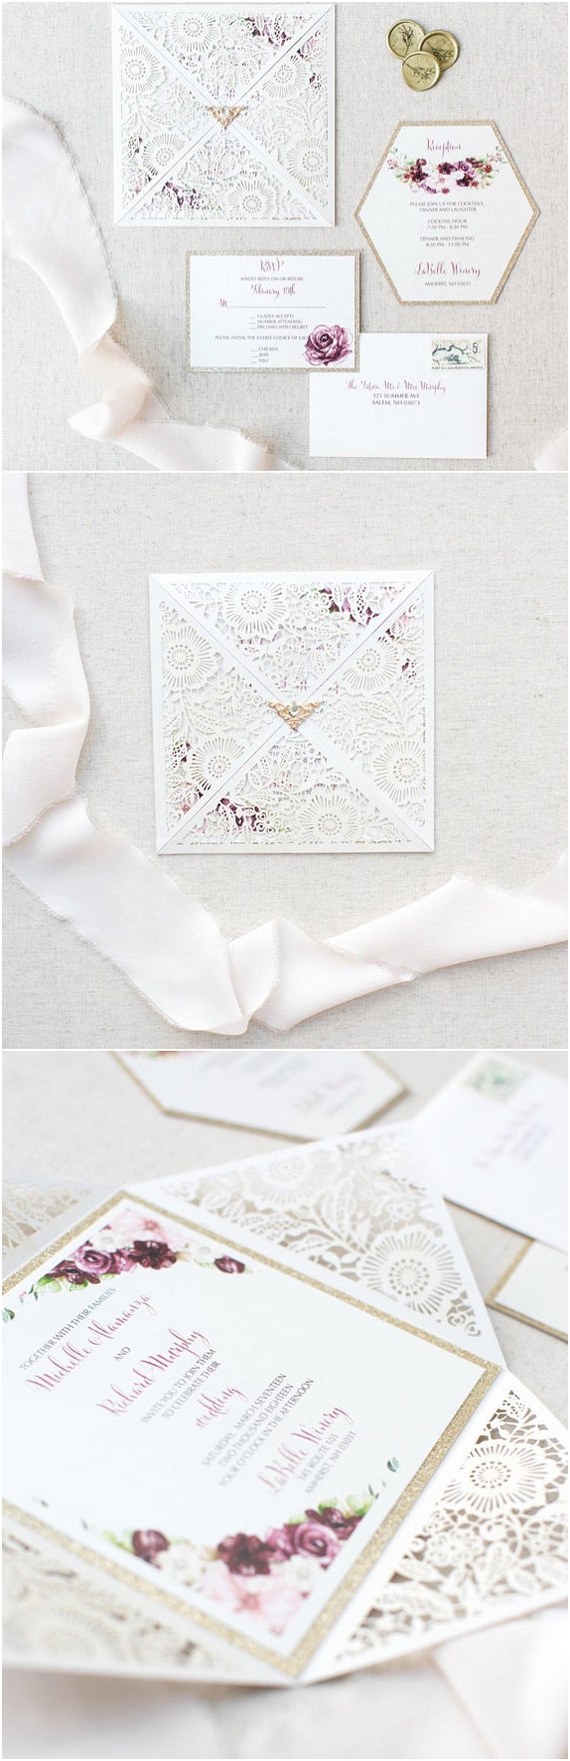 Gold and White Wedding Invitations Card